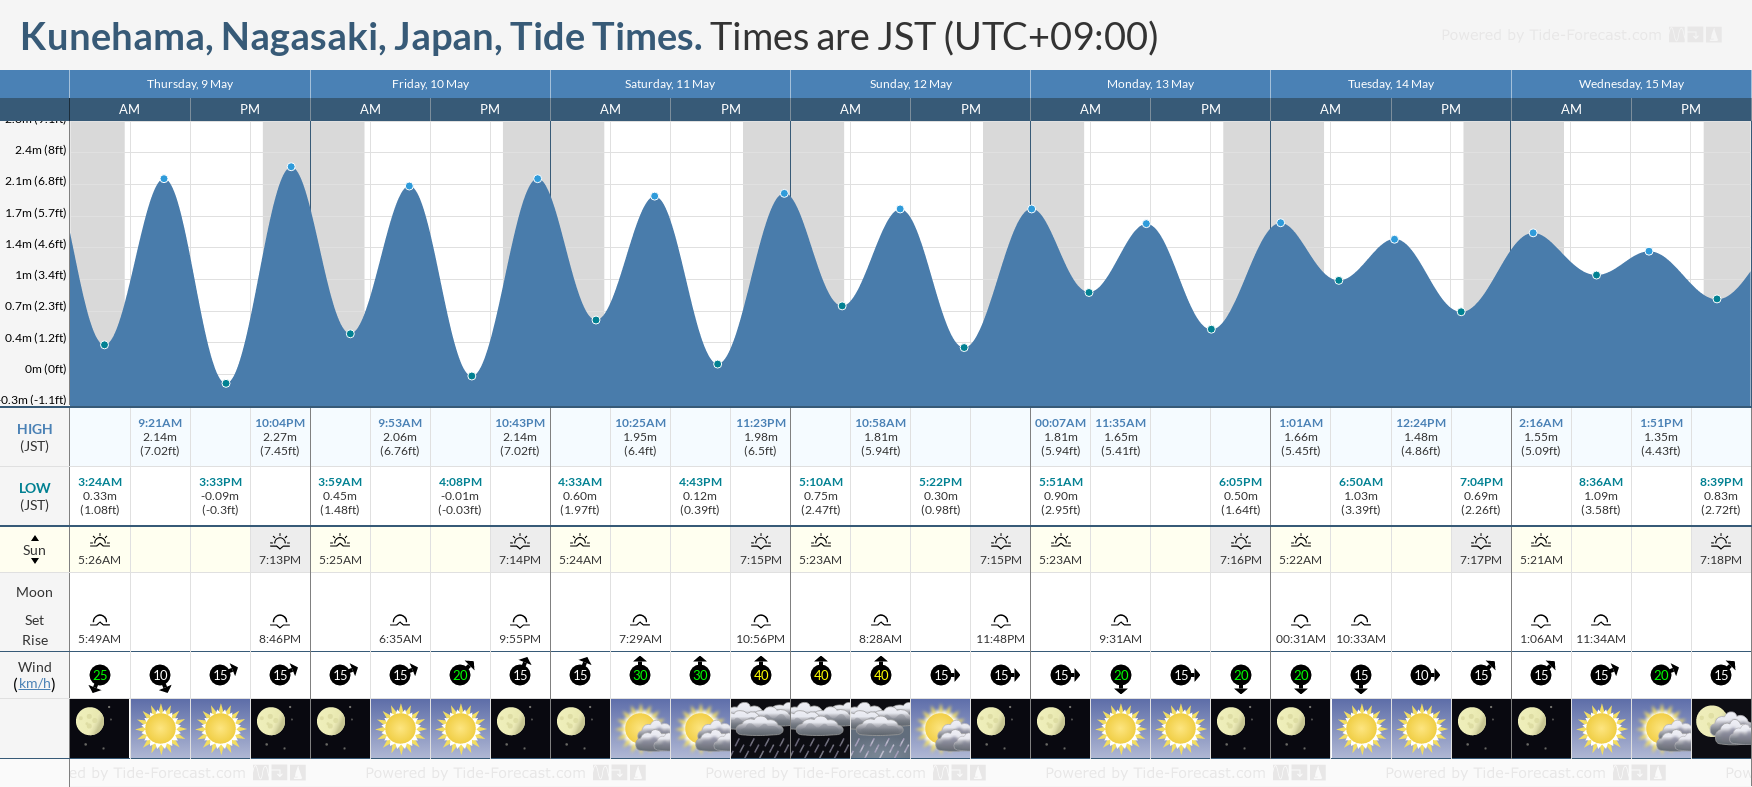 Kunehama, Nagasaki, Japan Tide Chart including high and low tide times for the next 7 days